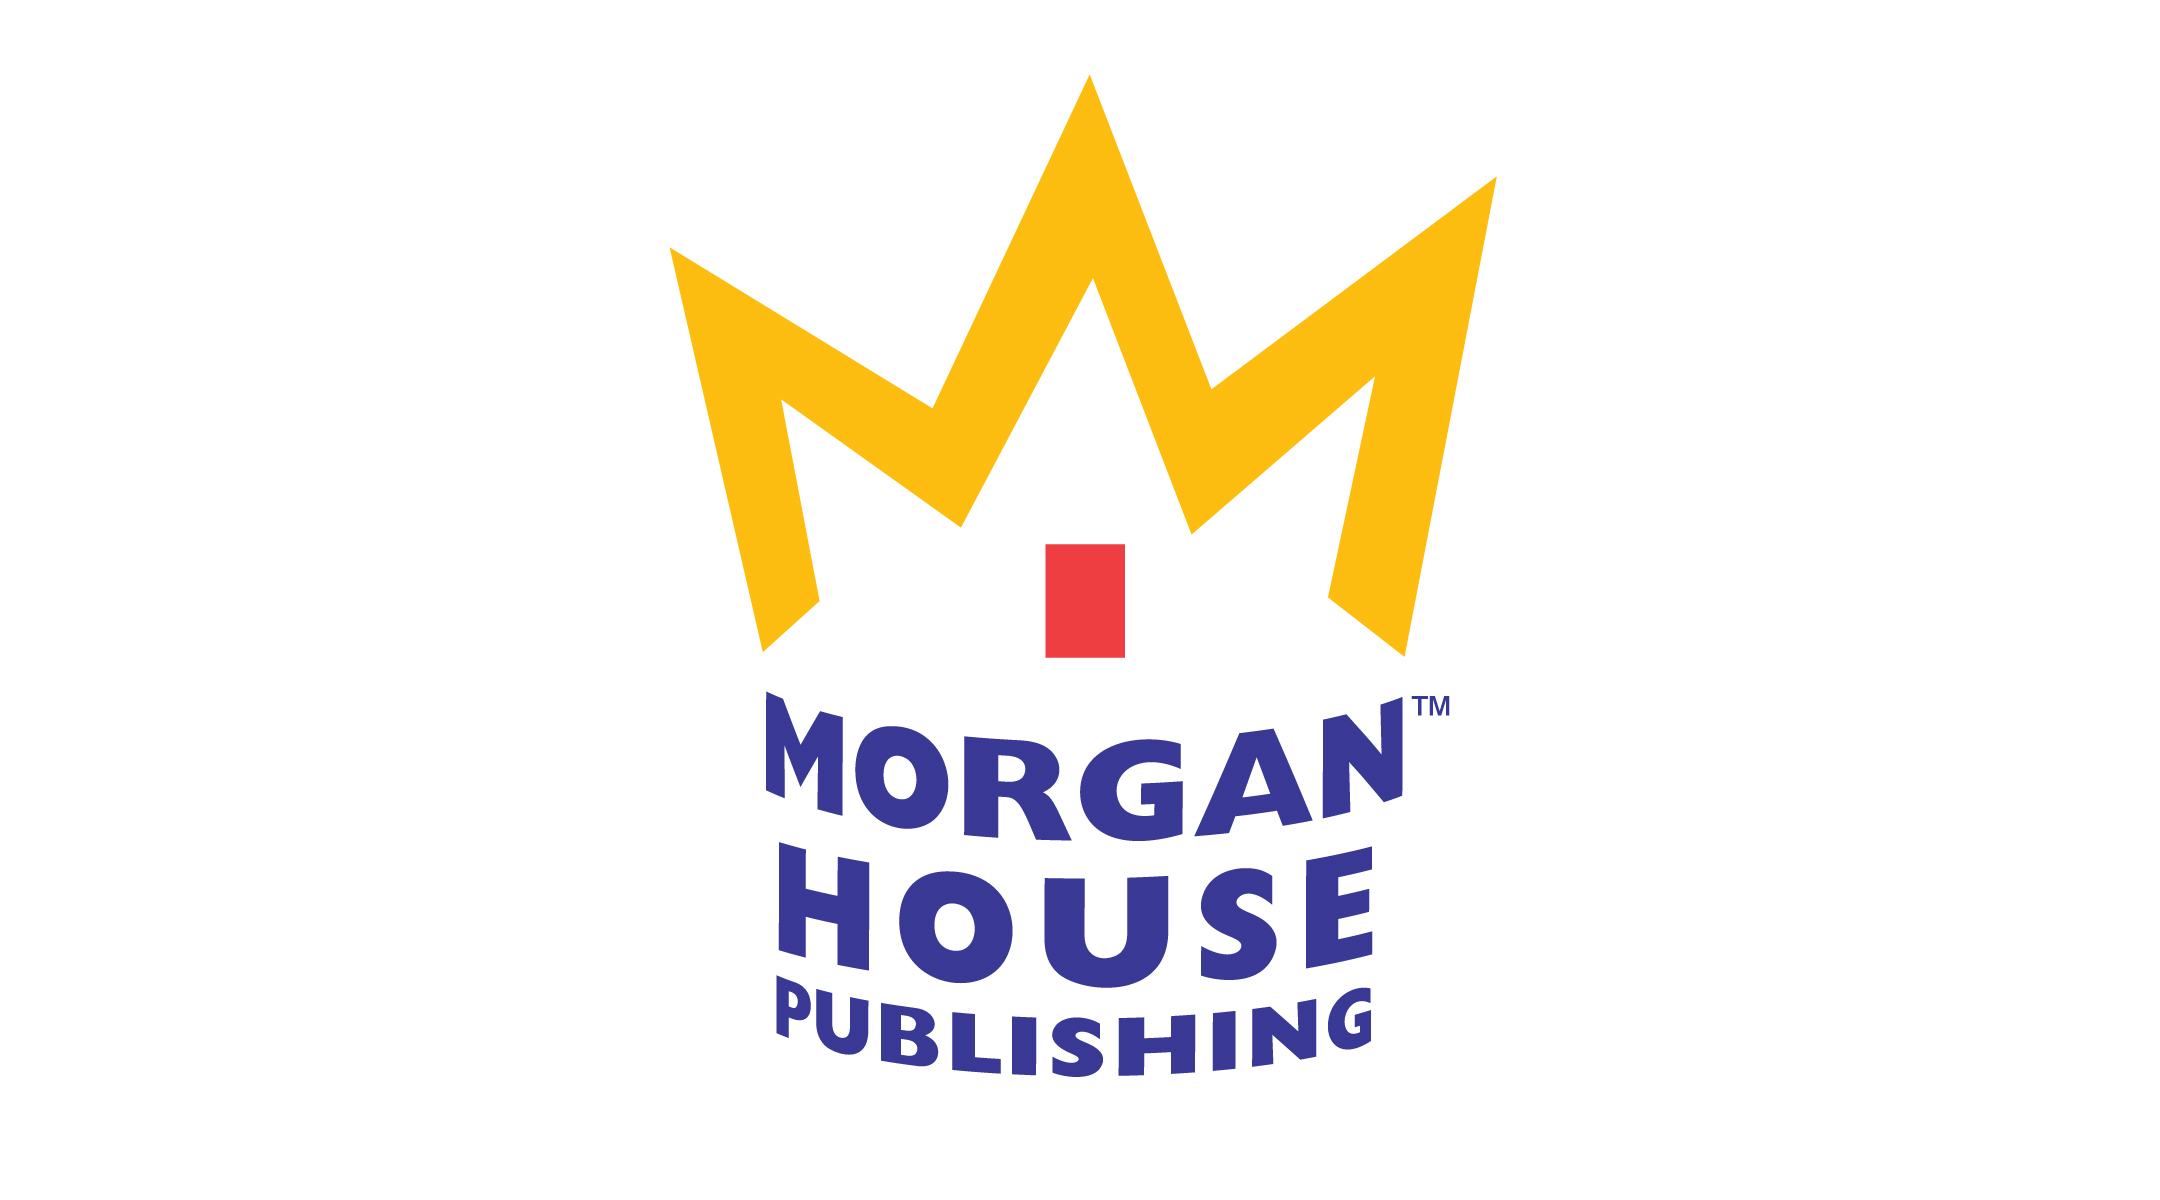 Logotype for Morgan House Publishing, a creator of children's books to benefit charitable organizations.